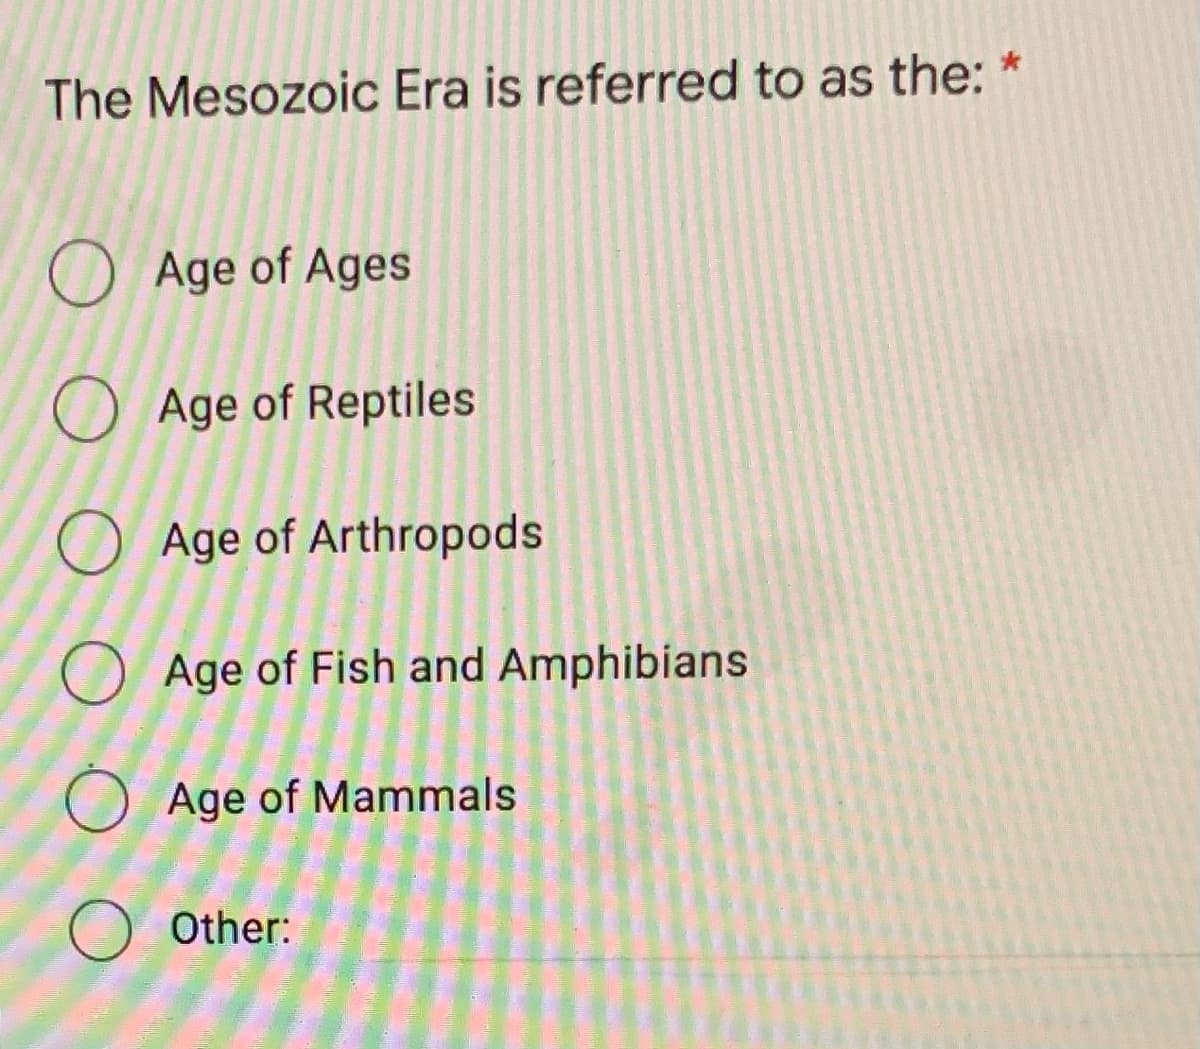 The Mesozoic Era is referred to as the: *
O Age of Ages
O Age of Reptiles
O Age of Arthropods
Age of Fish and Amphibians
O Age of Mammals
O Other:
